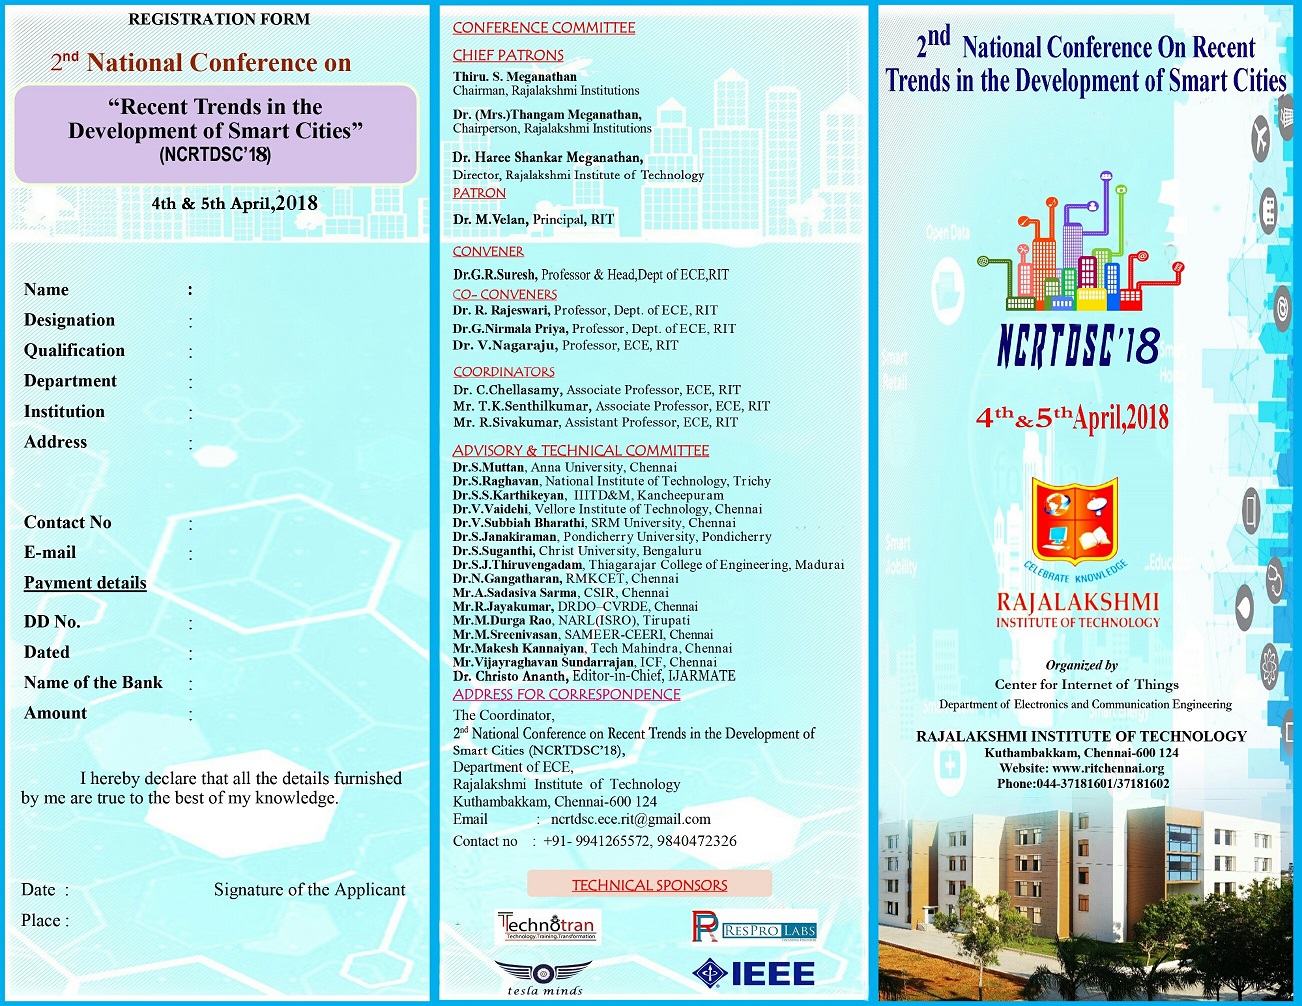 Second National Conference on Recent Trends in the Development of Smart Cities NCRTDSC 18